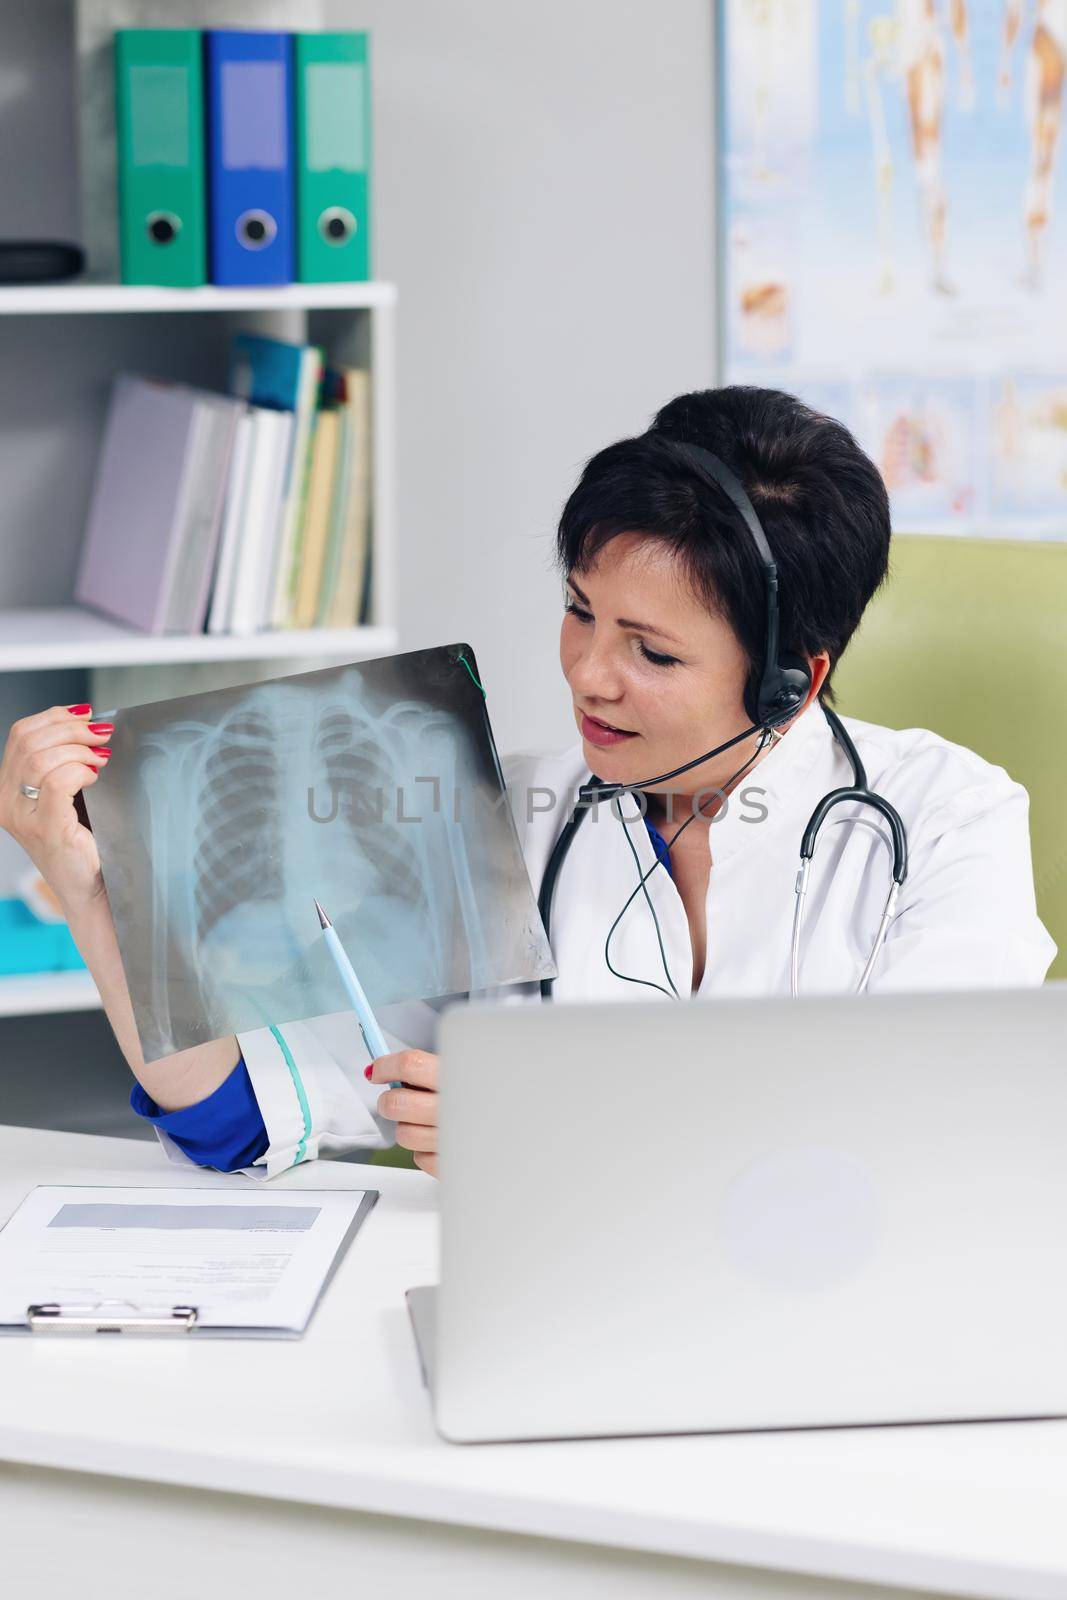 Female medical doctor wears white coat, headset video calling distant patient on laptop. Doctor talking to client using virtual chat computer app. Telemedicine, remote healthcare services concept.